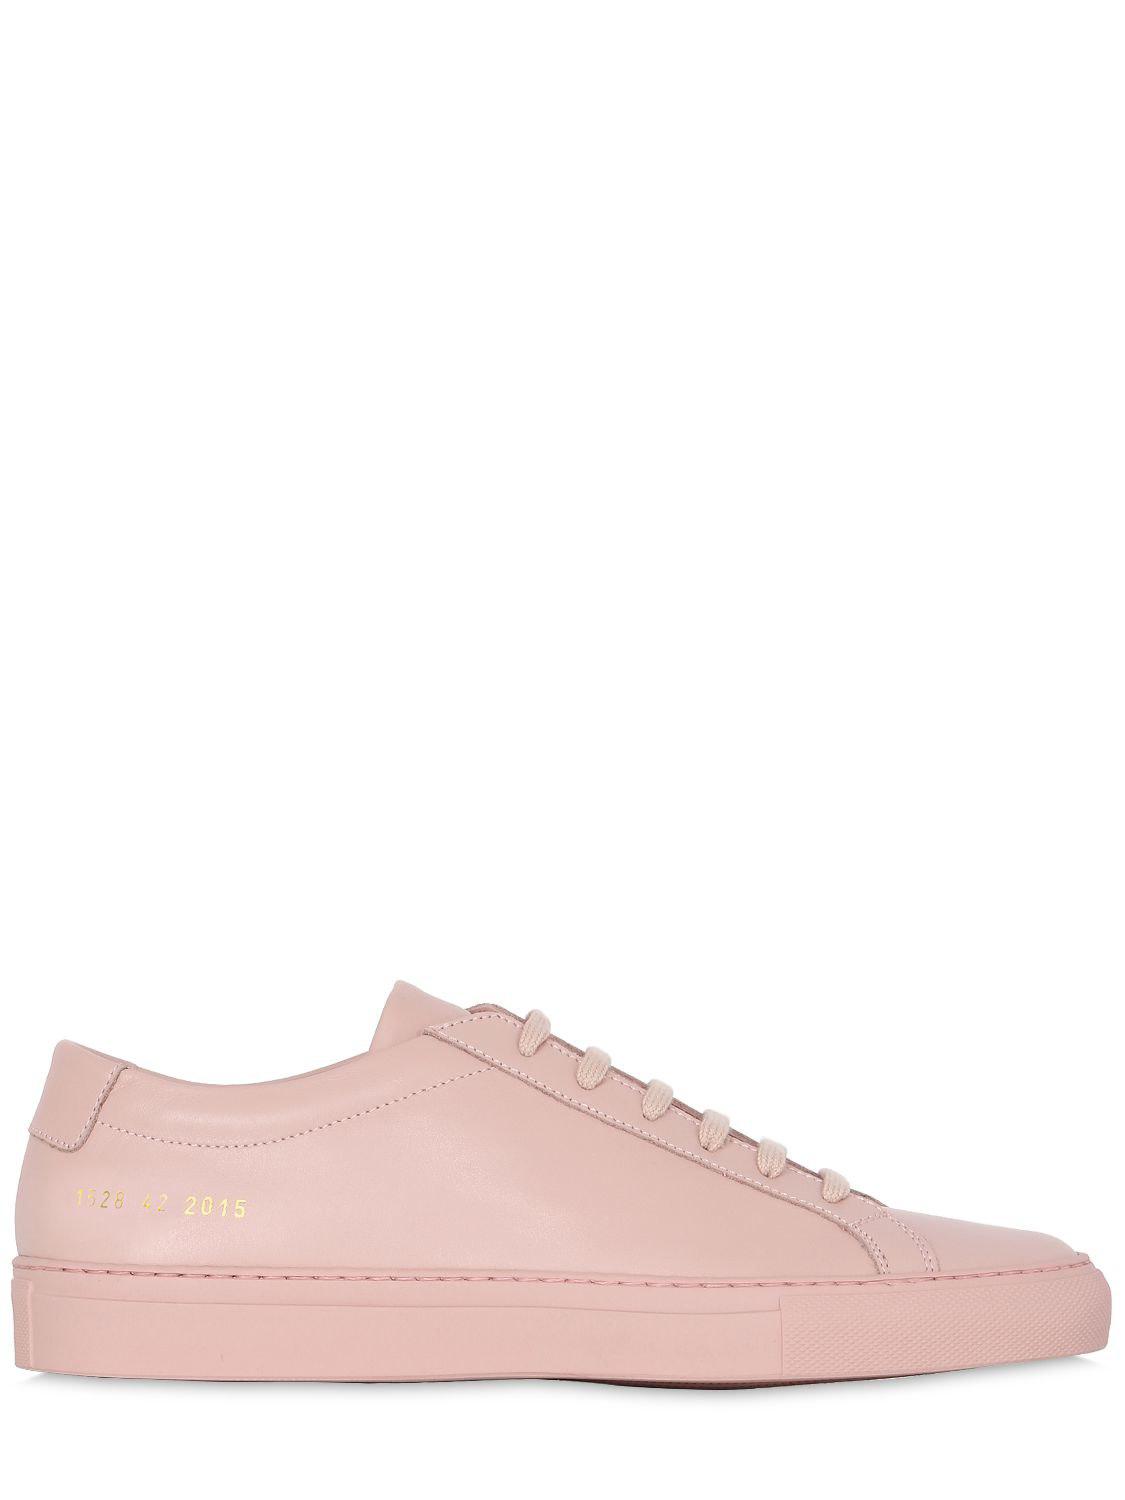 Common Projects Original Achilles Low-top Leather Trainers in Pink for ...